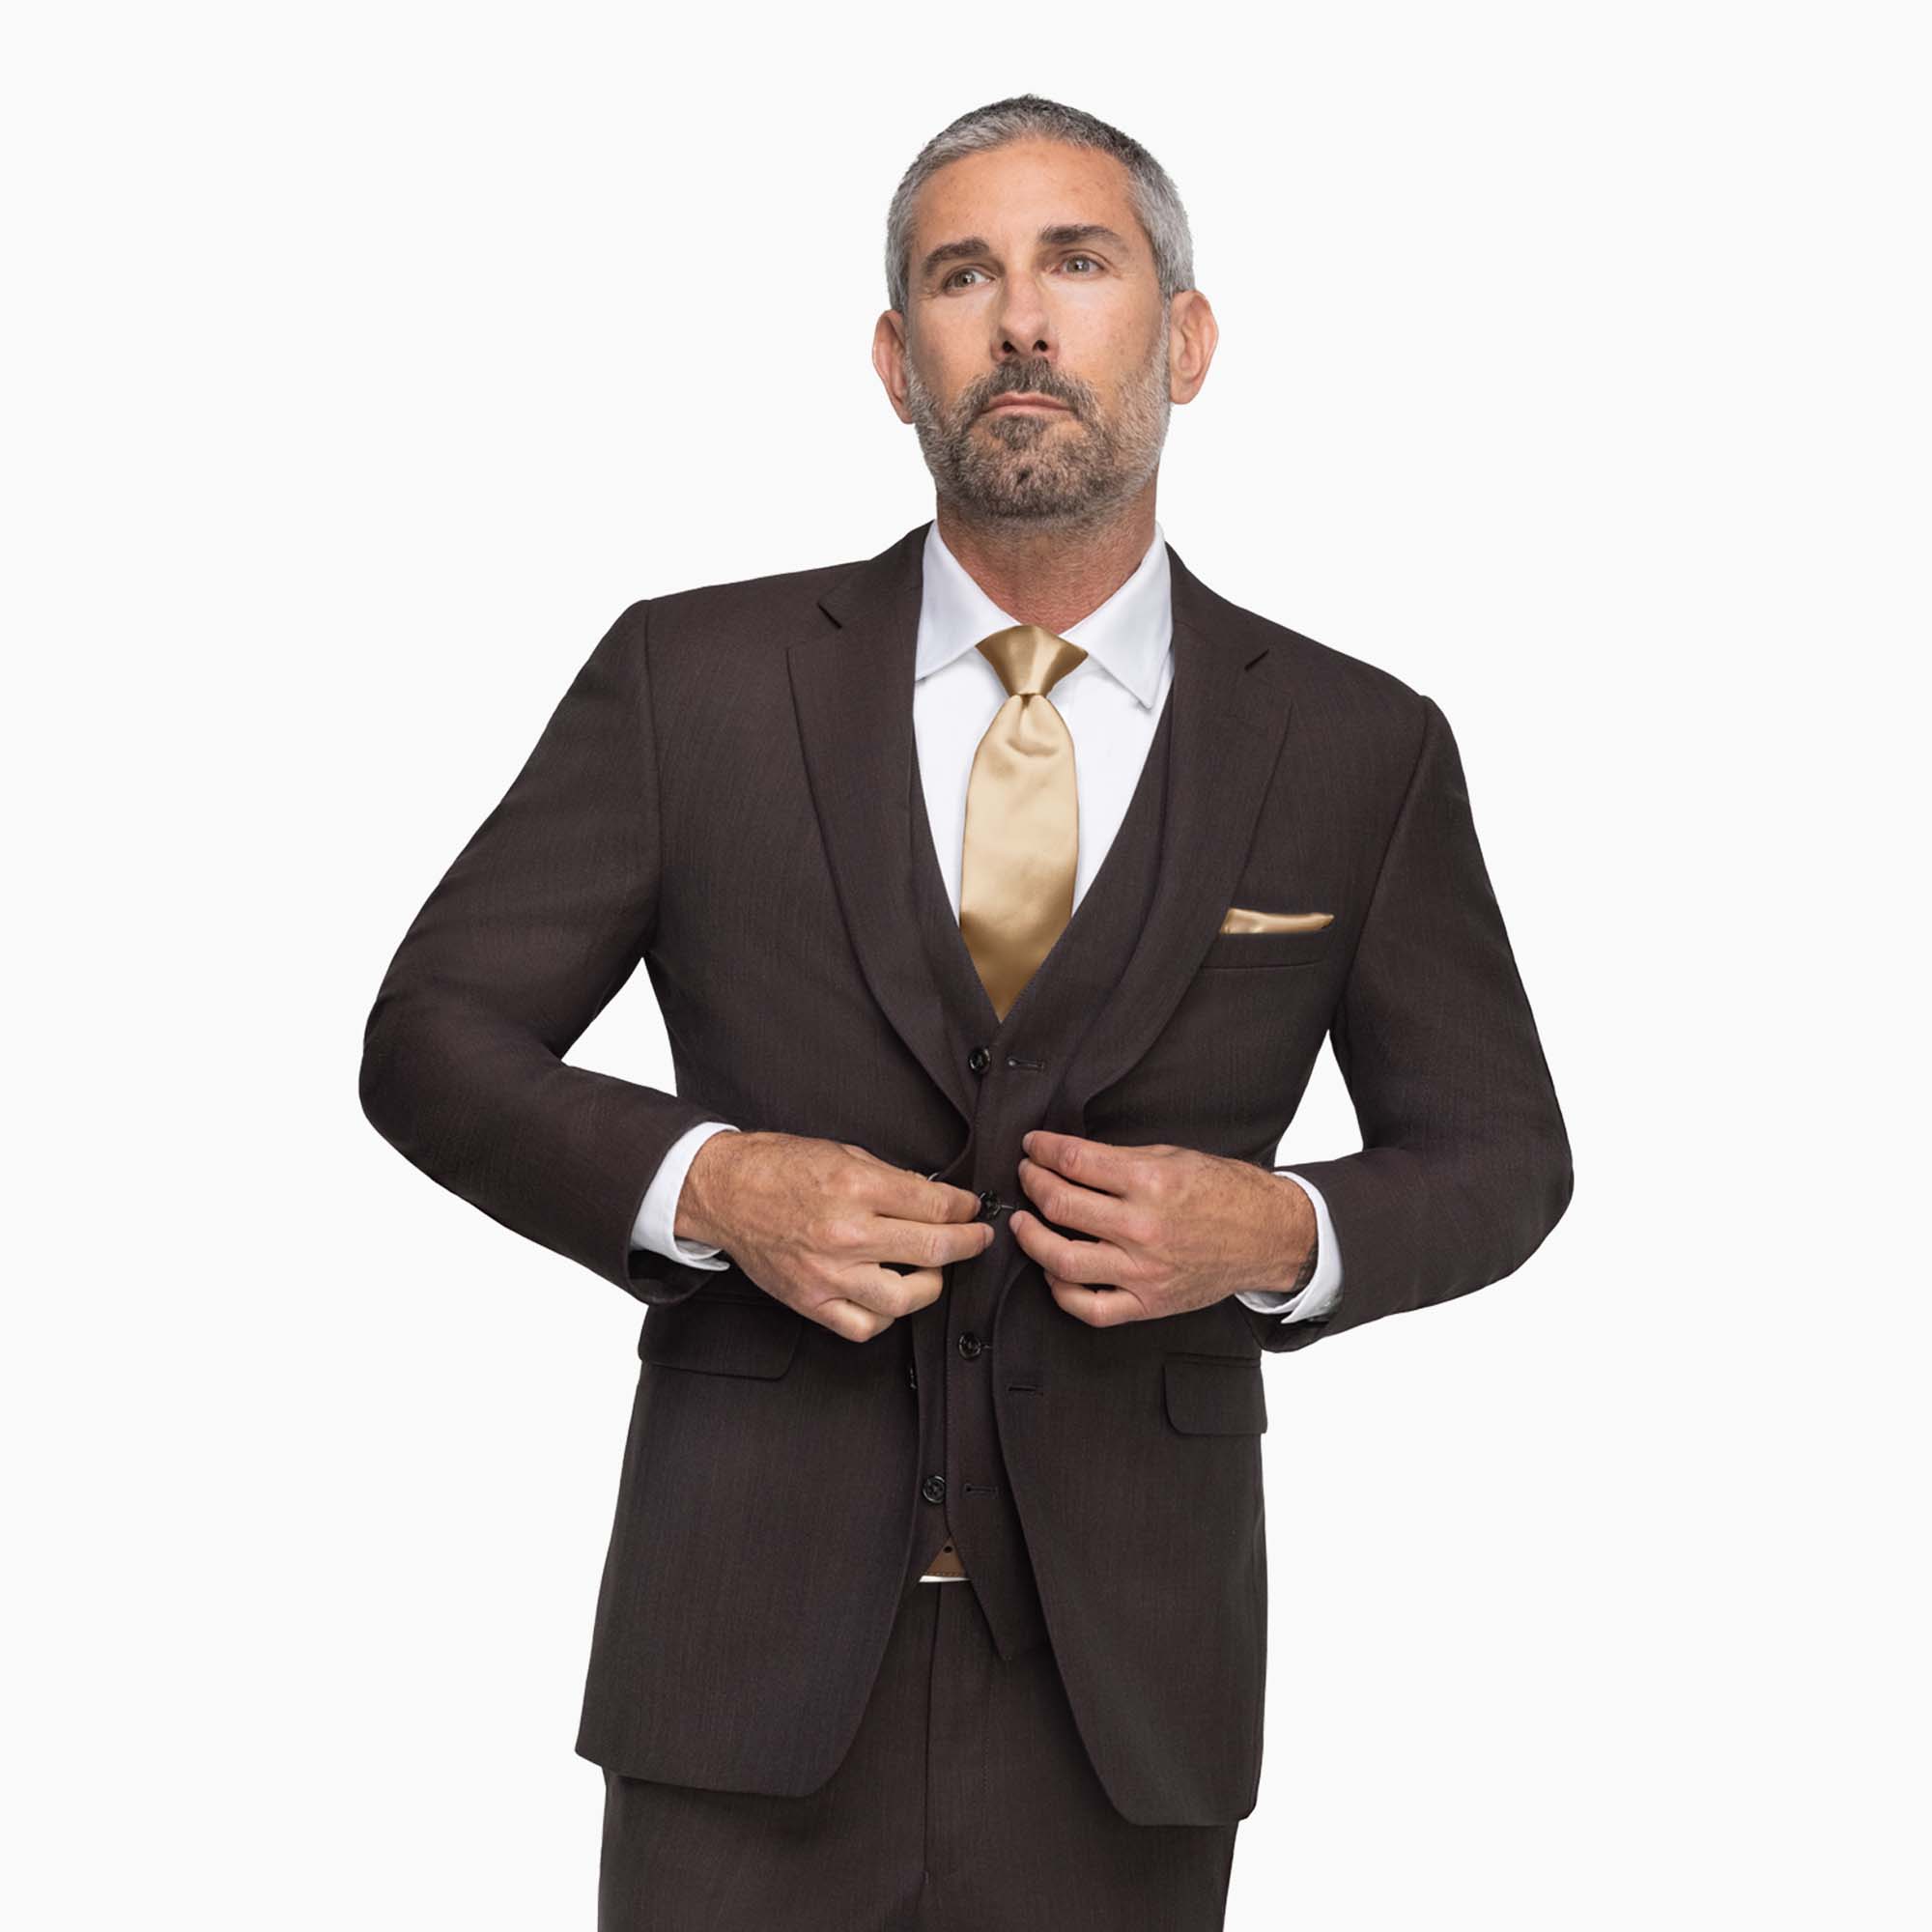 Earth-toned Allure Dark Brown Suit on male model